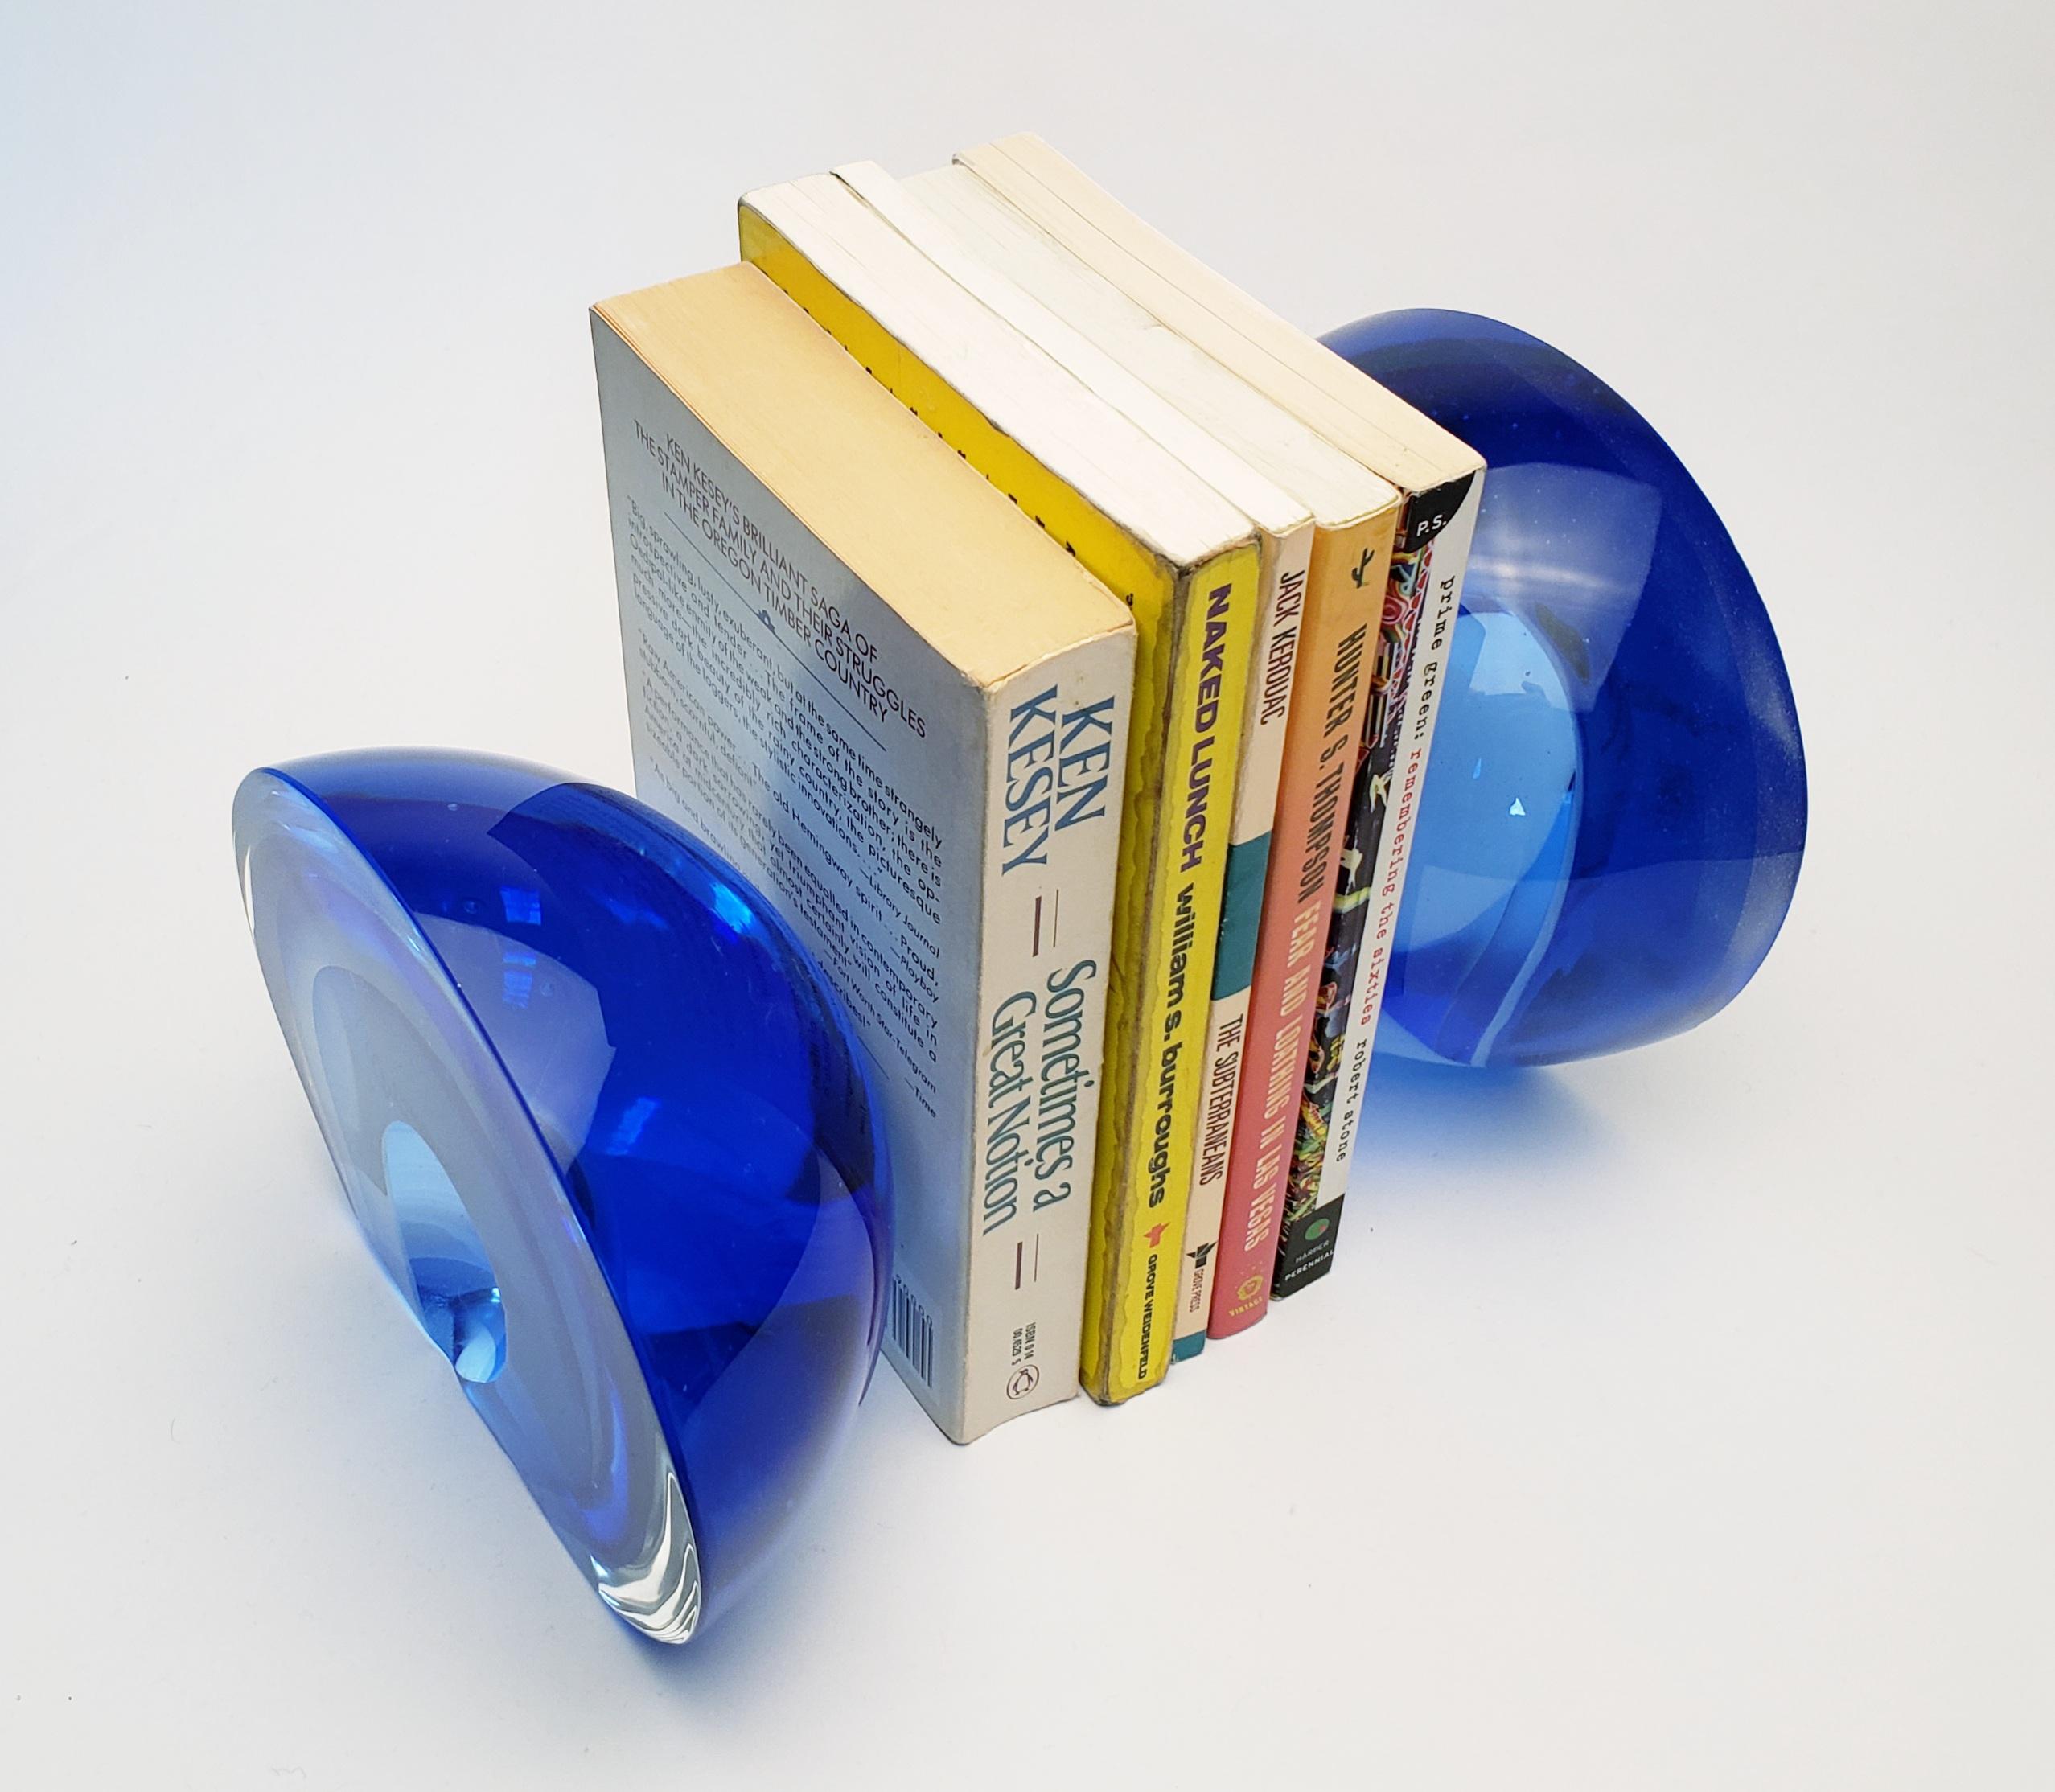 The Sonic Bookends design was created with the intent of recreating the image of audio waves emerging from the books they are charged with keeping upright, as though to amplify the words contained on the pages. Inspired by the environmental